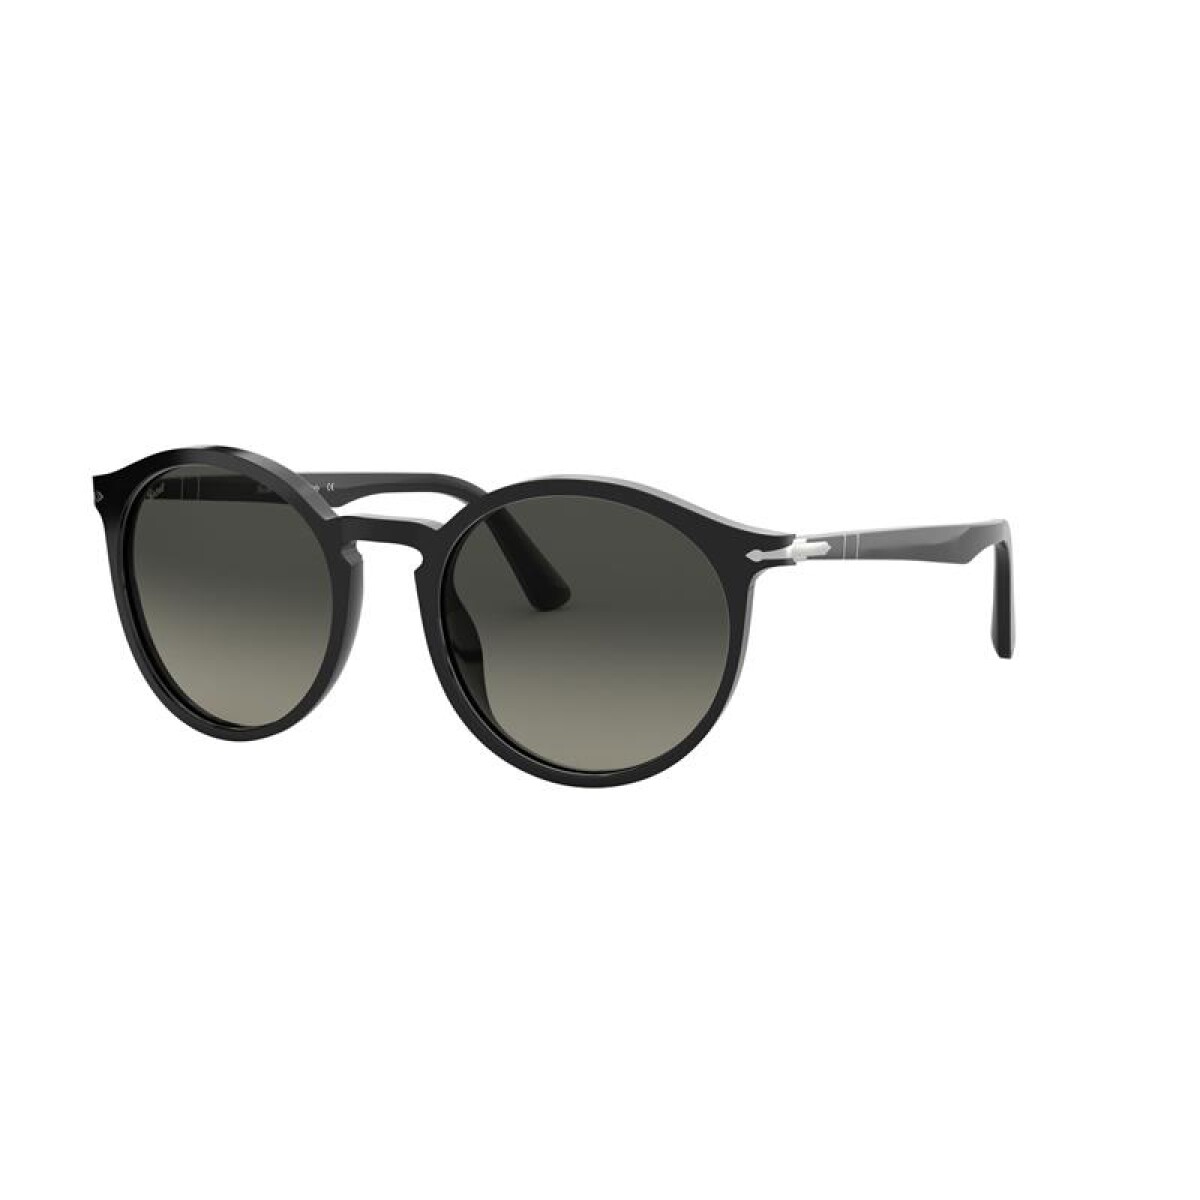 Persol 3214-s - 95/71 